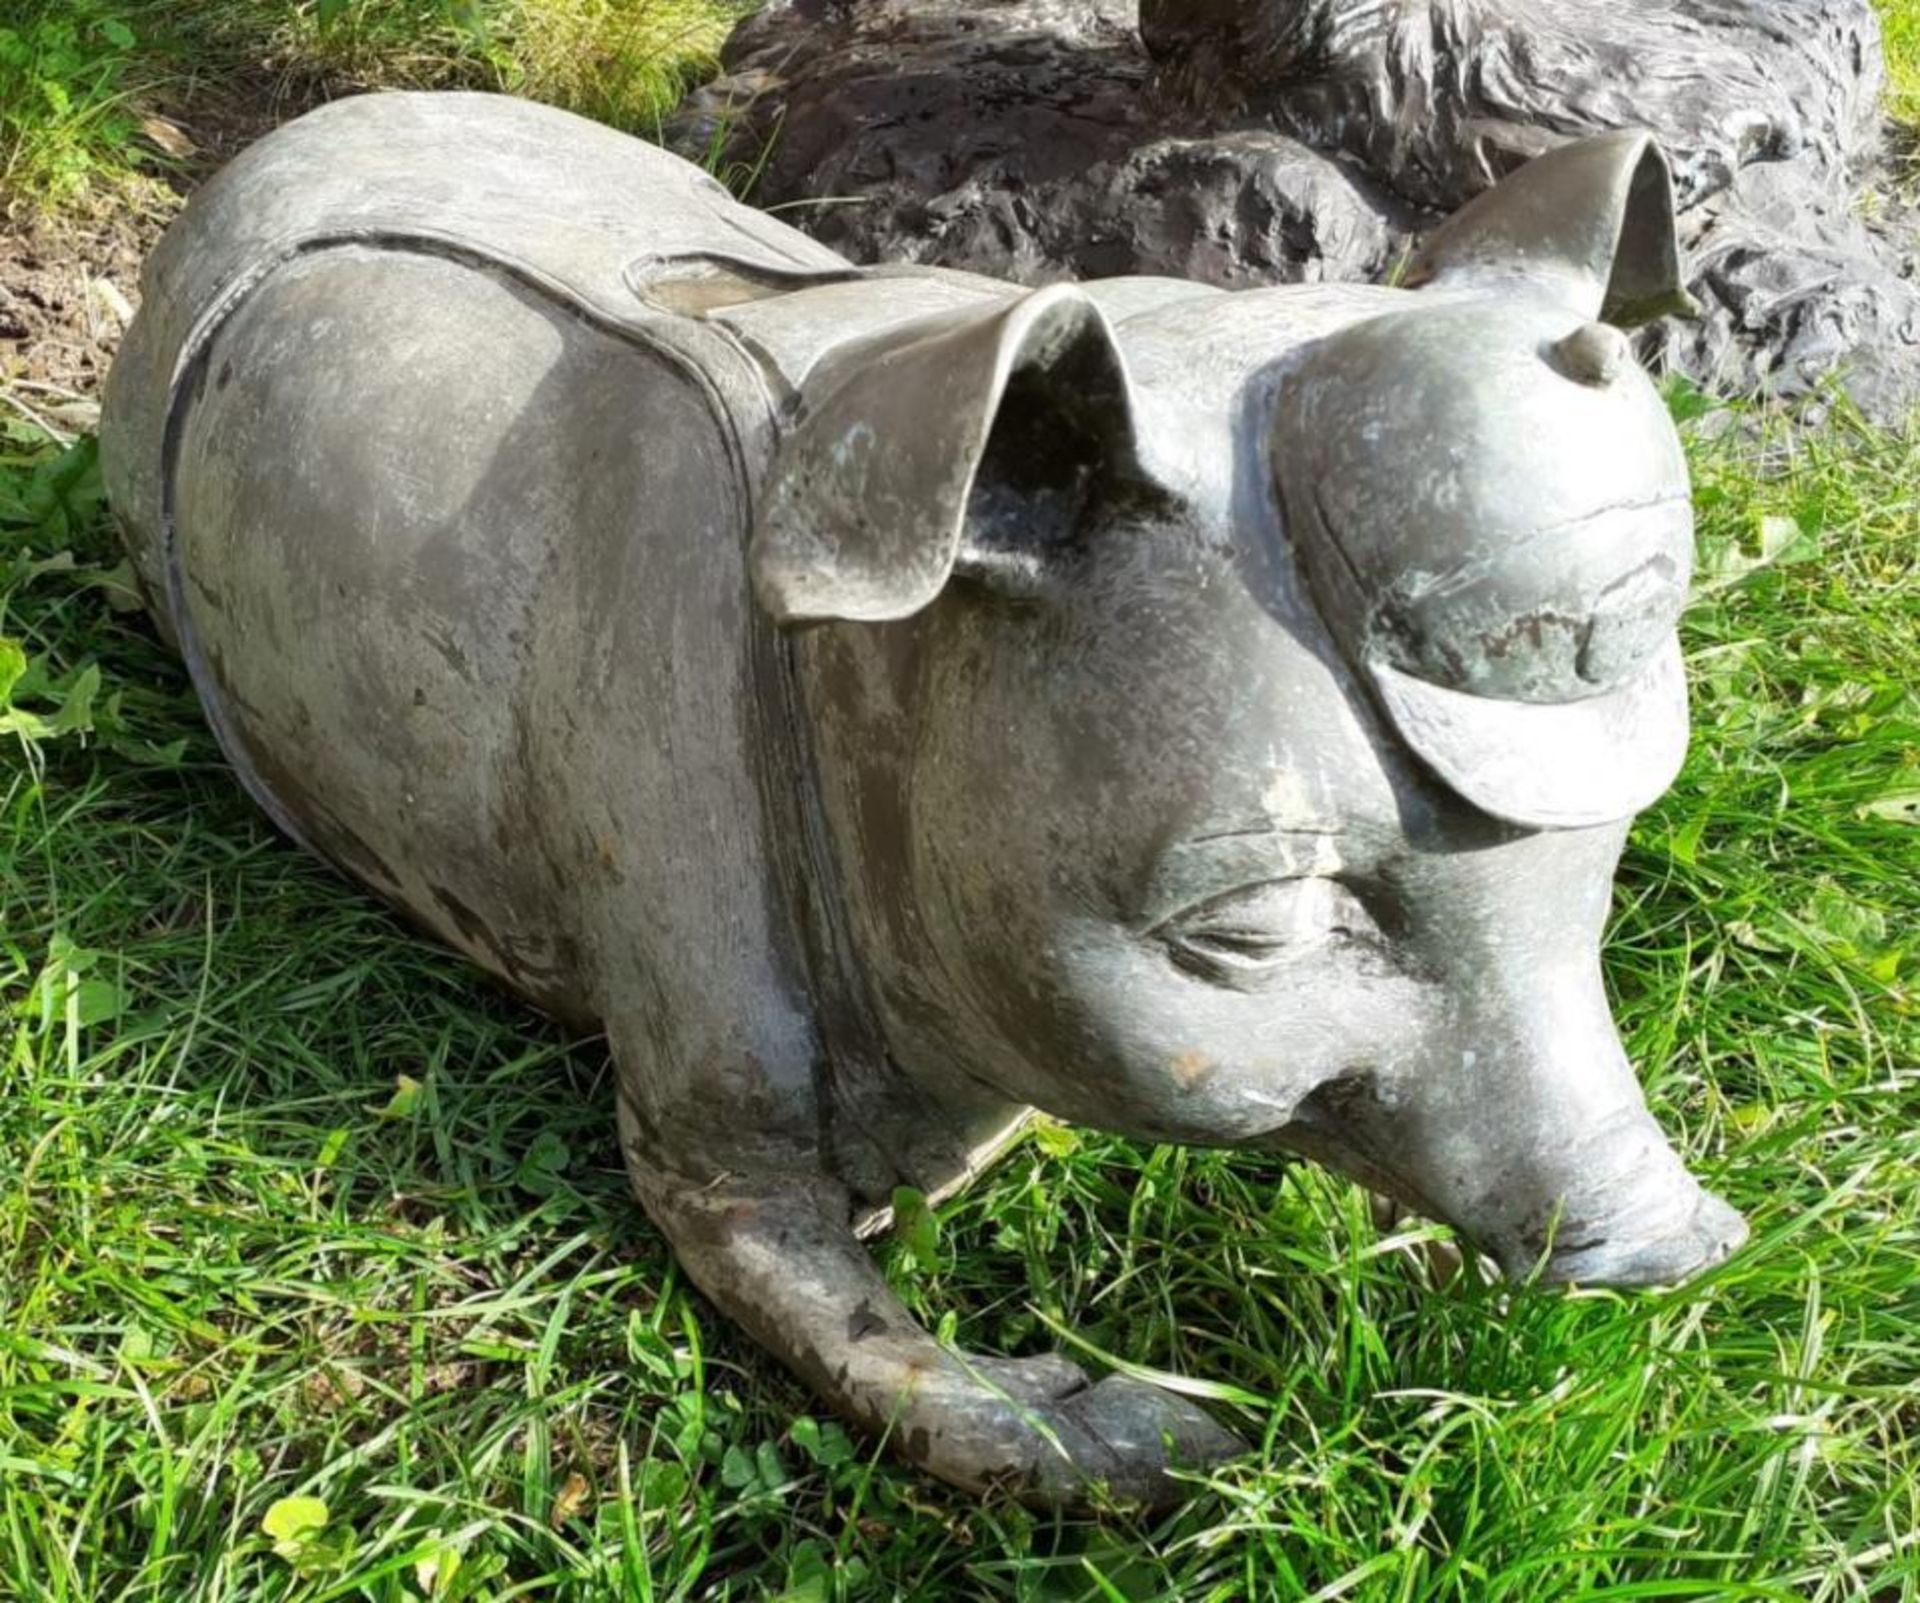 1 x Lazy Pig Metal Garden Statue - Dimensions: L 80cm x 30 x height 30cm - Ref: JB101 - Pre-Owned - - Image 2 of 8